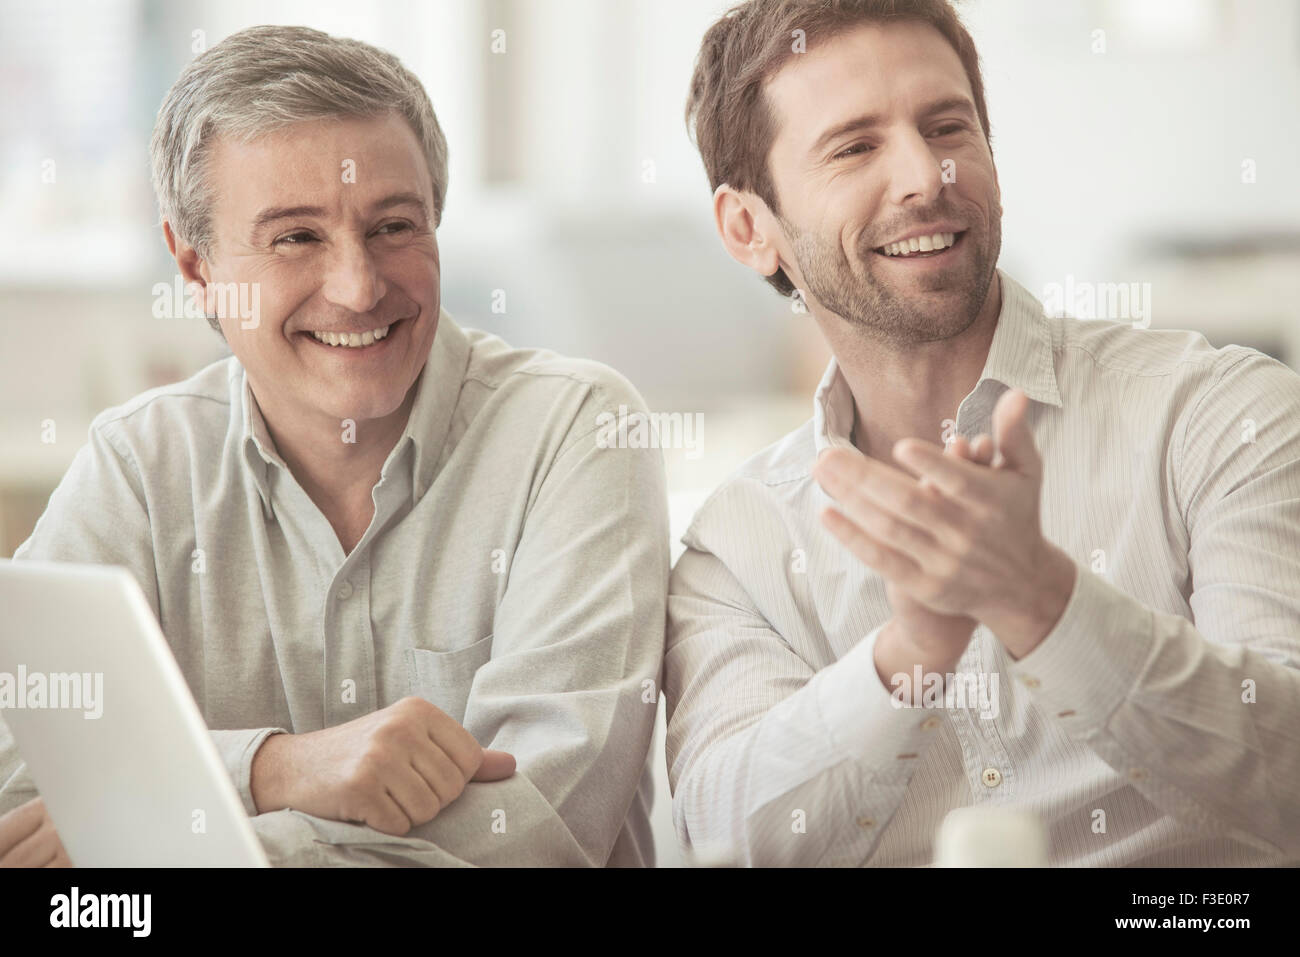 Colleagues smiling and clapping Stock Photo